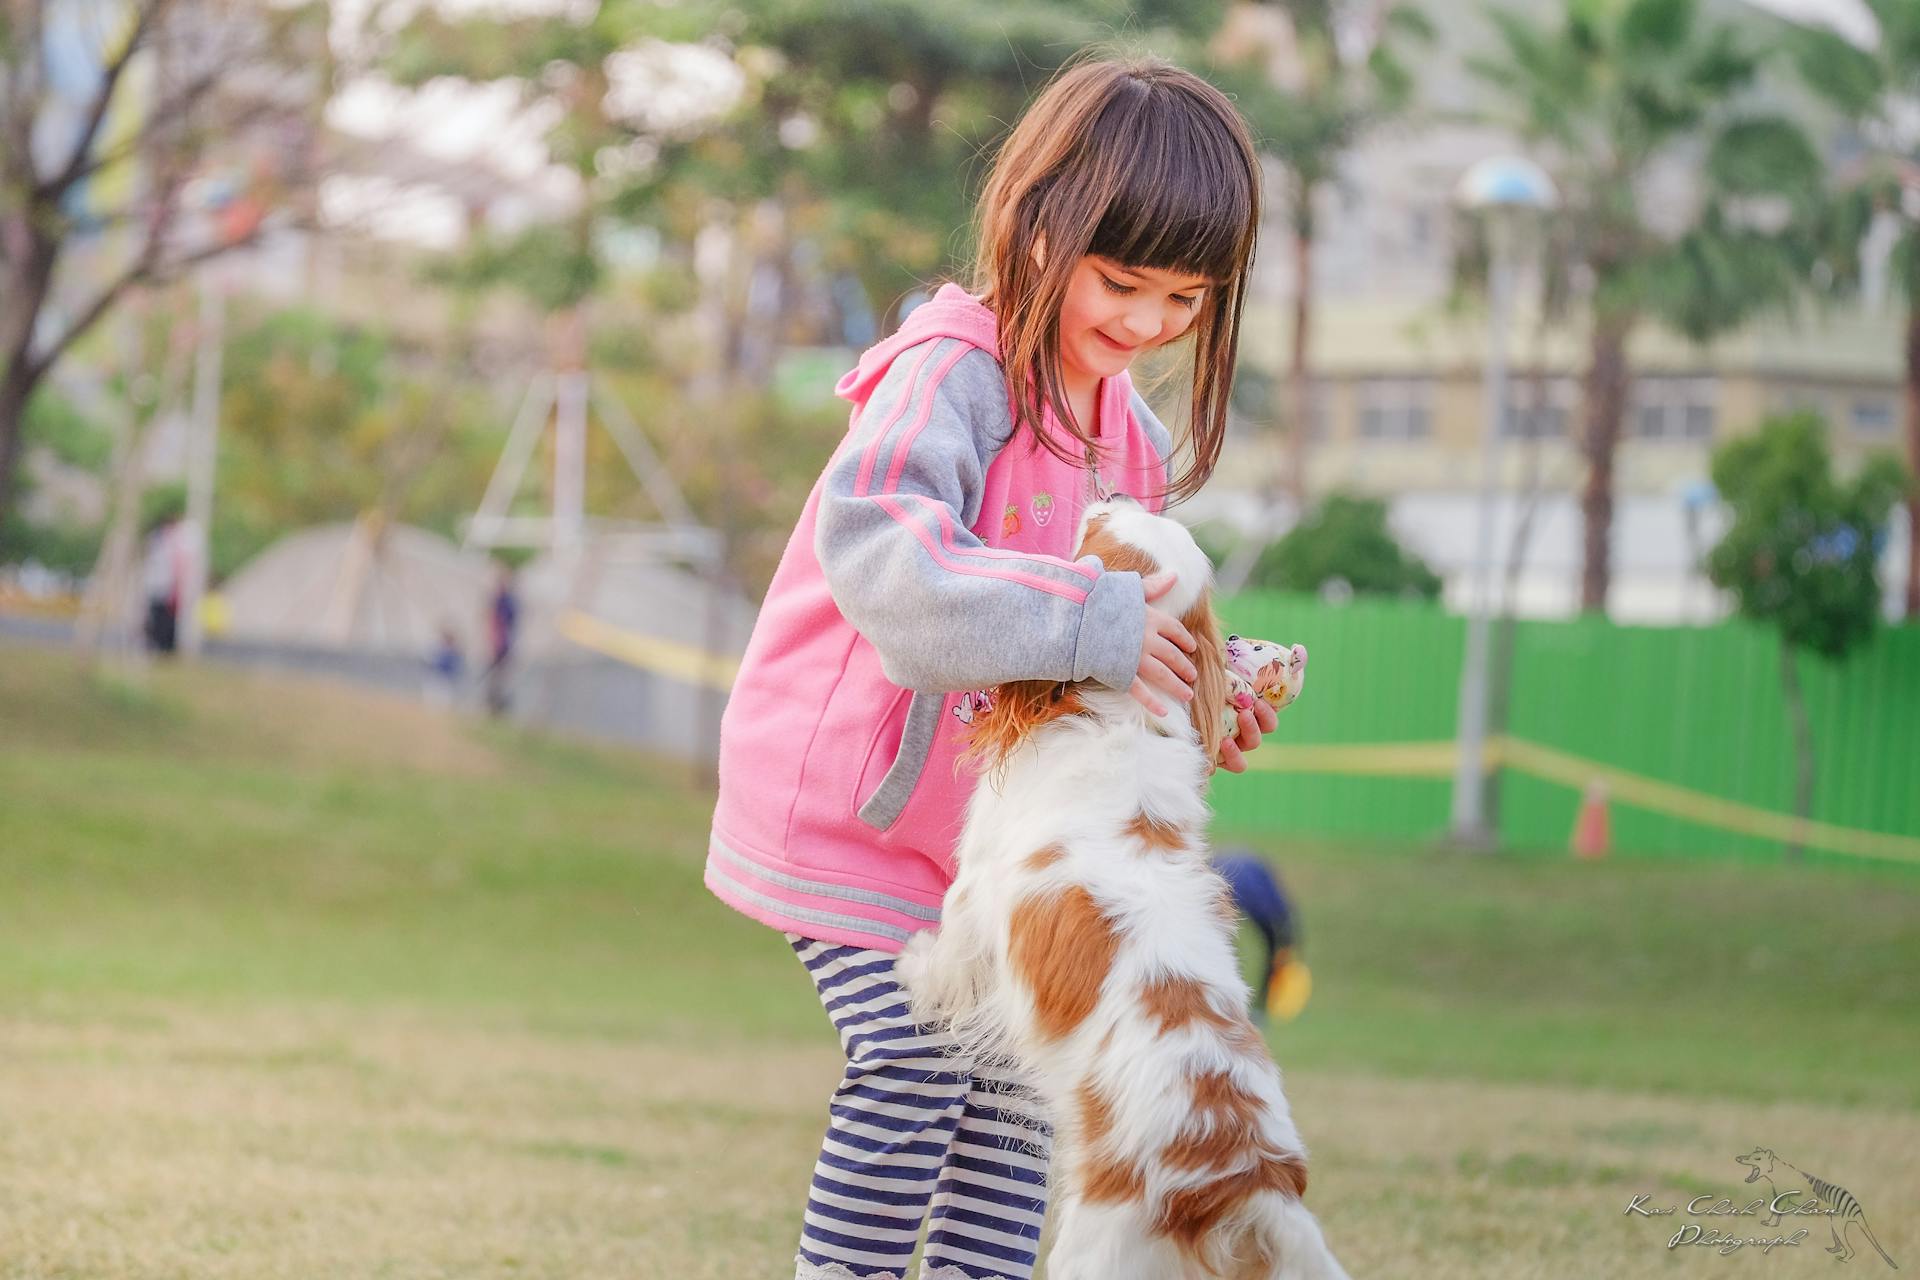 15 Playful Loyalty Activities for Kids